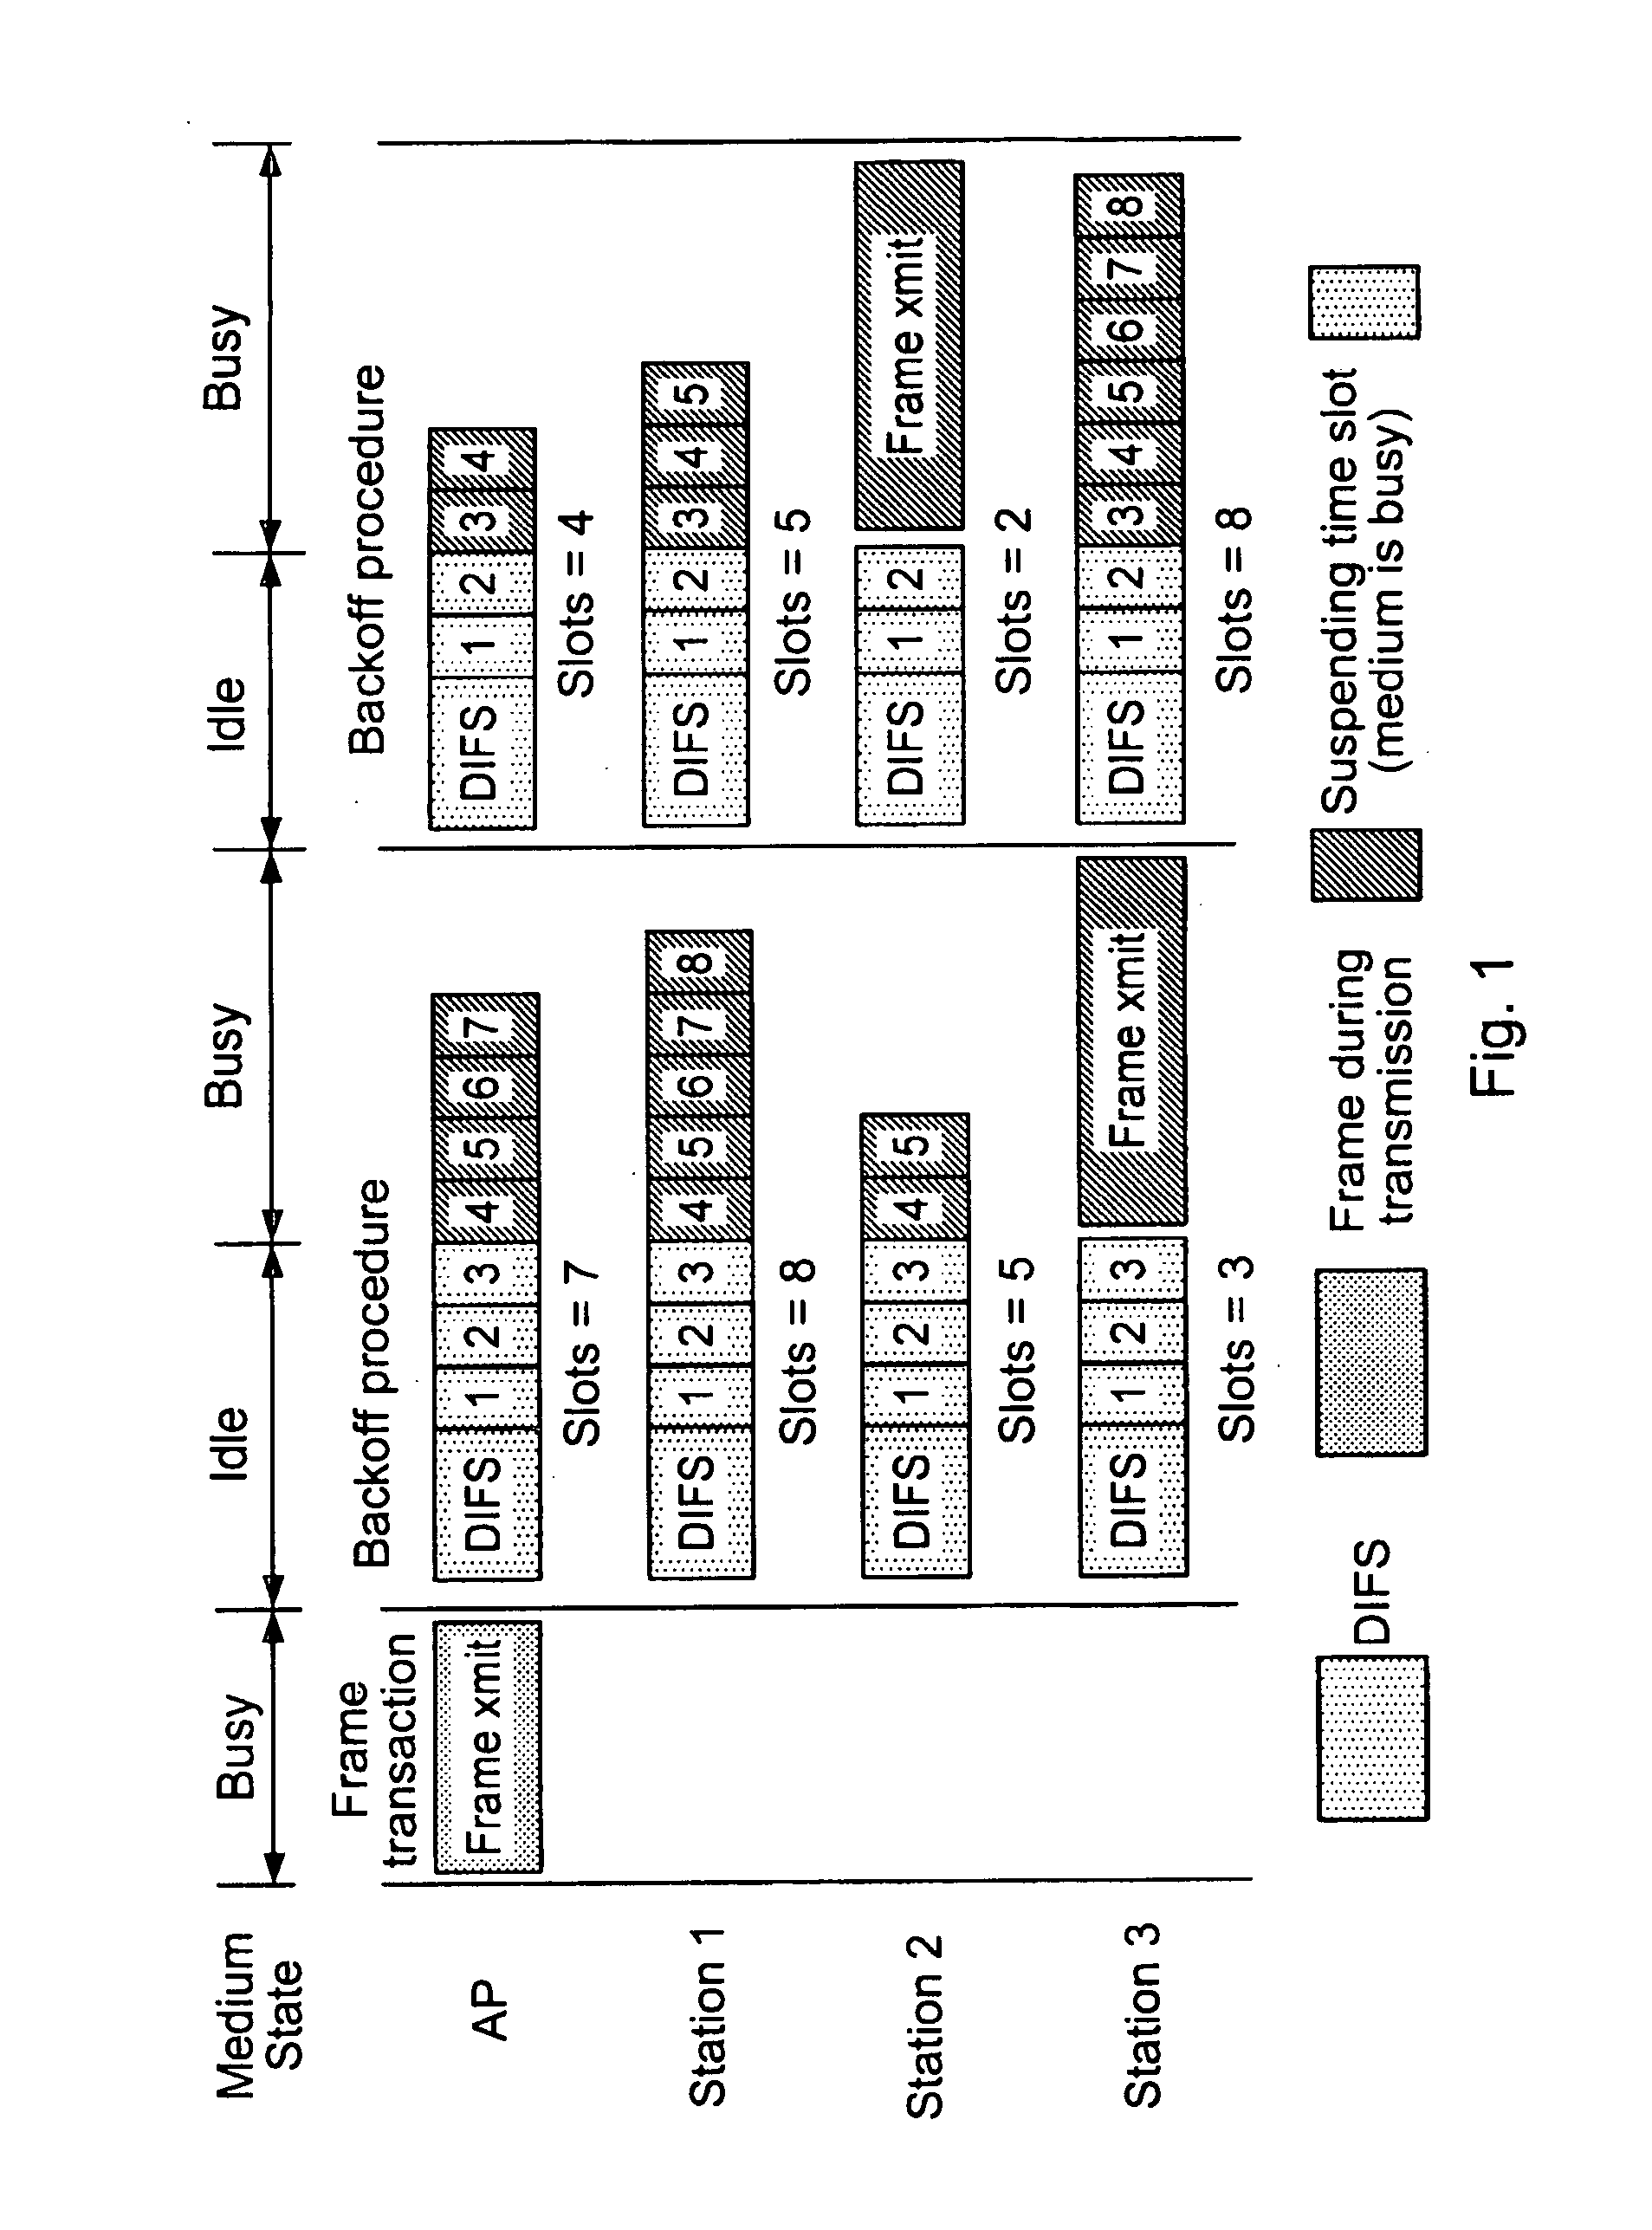 Method and apparatus for media access in contention-based networks